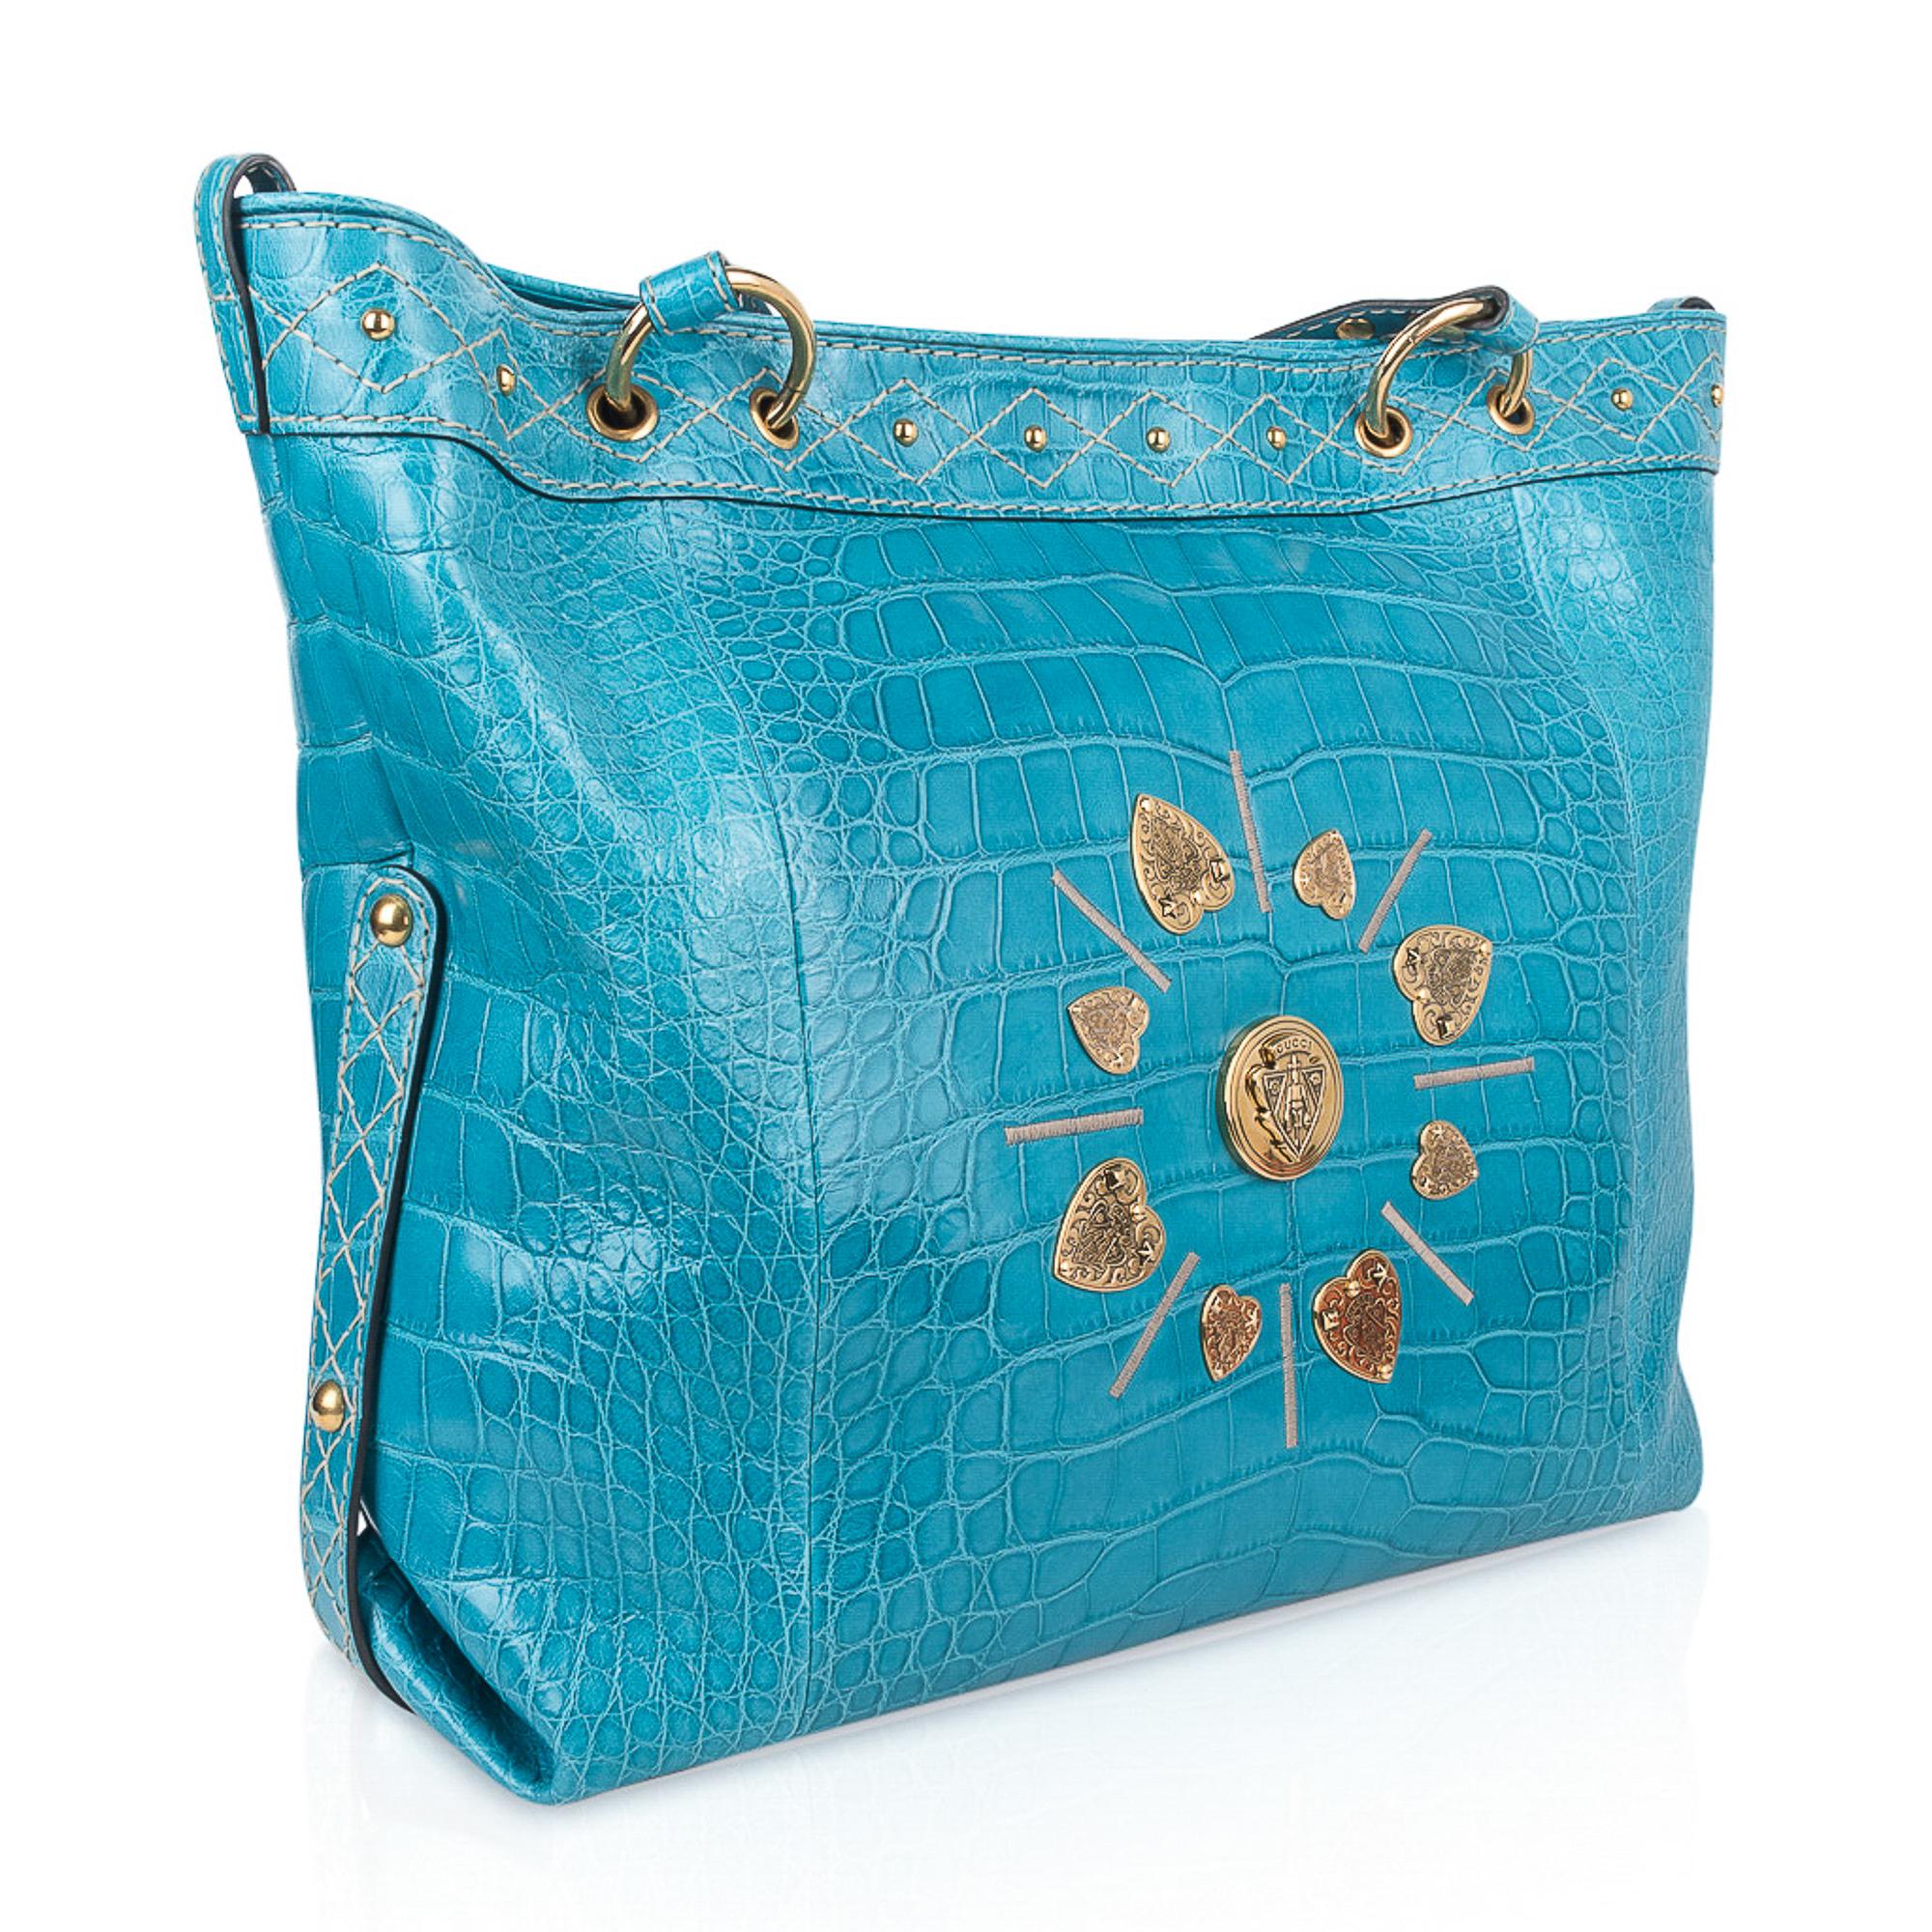 Gucci exclusive Limited Edition Turquoise fabulous large tote style bag featured in the softest, lightest Crocodile ever. 
This roomy treasure is a fantastic every day and travel bag! 
Magnificent color in a semi gloss skin.  Semi gloss is not the